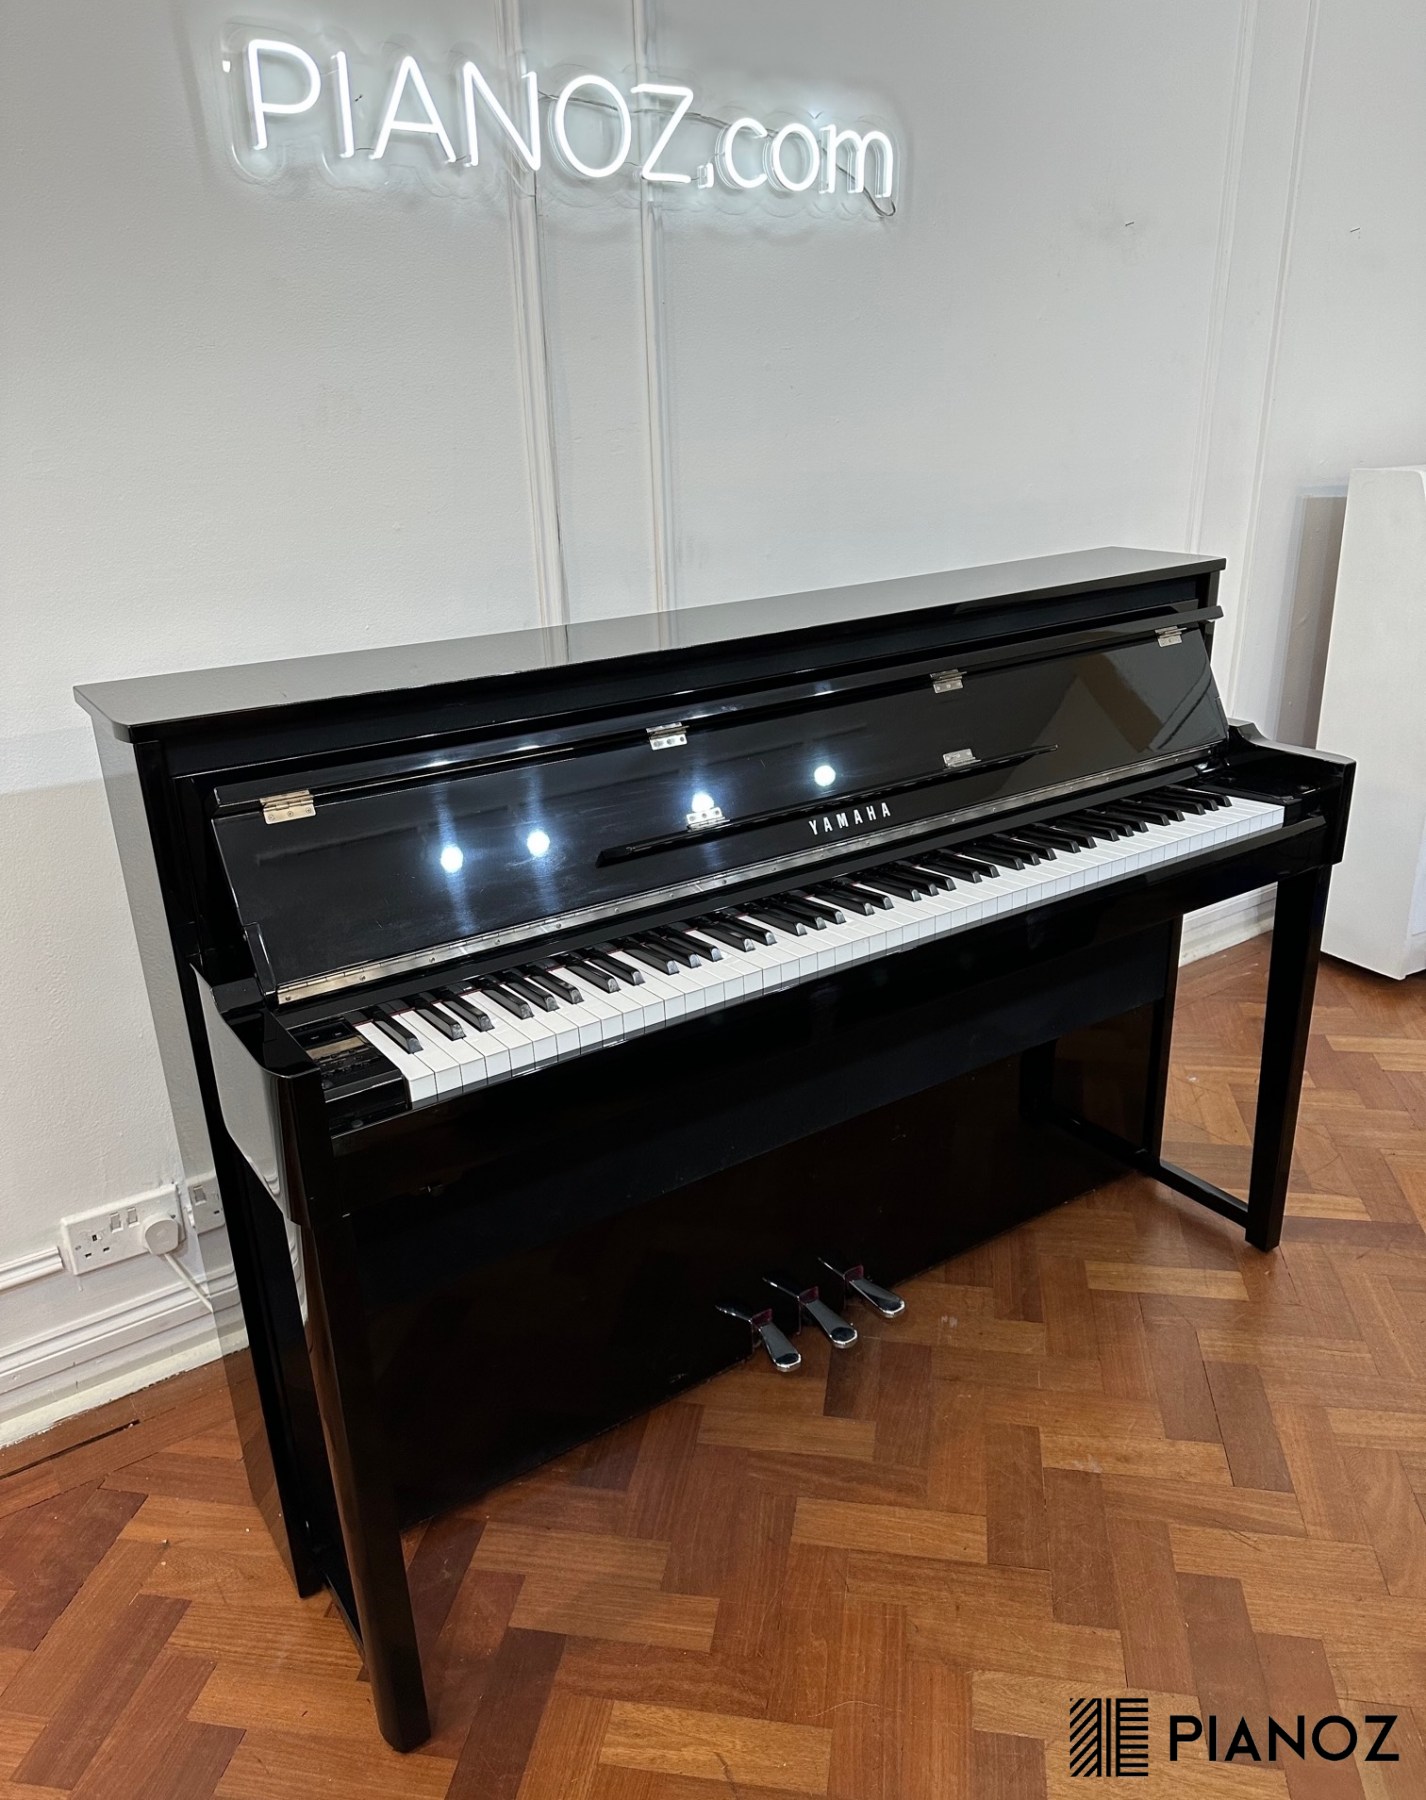 Yamaha NU1 Digital Hybrid (duplicate entered by mistake) Upright Piano piano for sale in UK